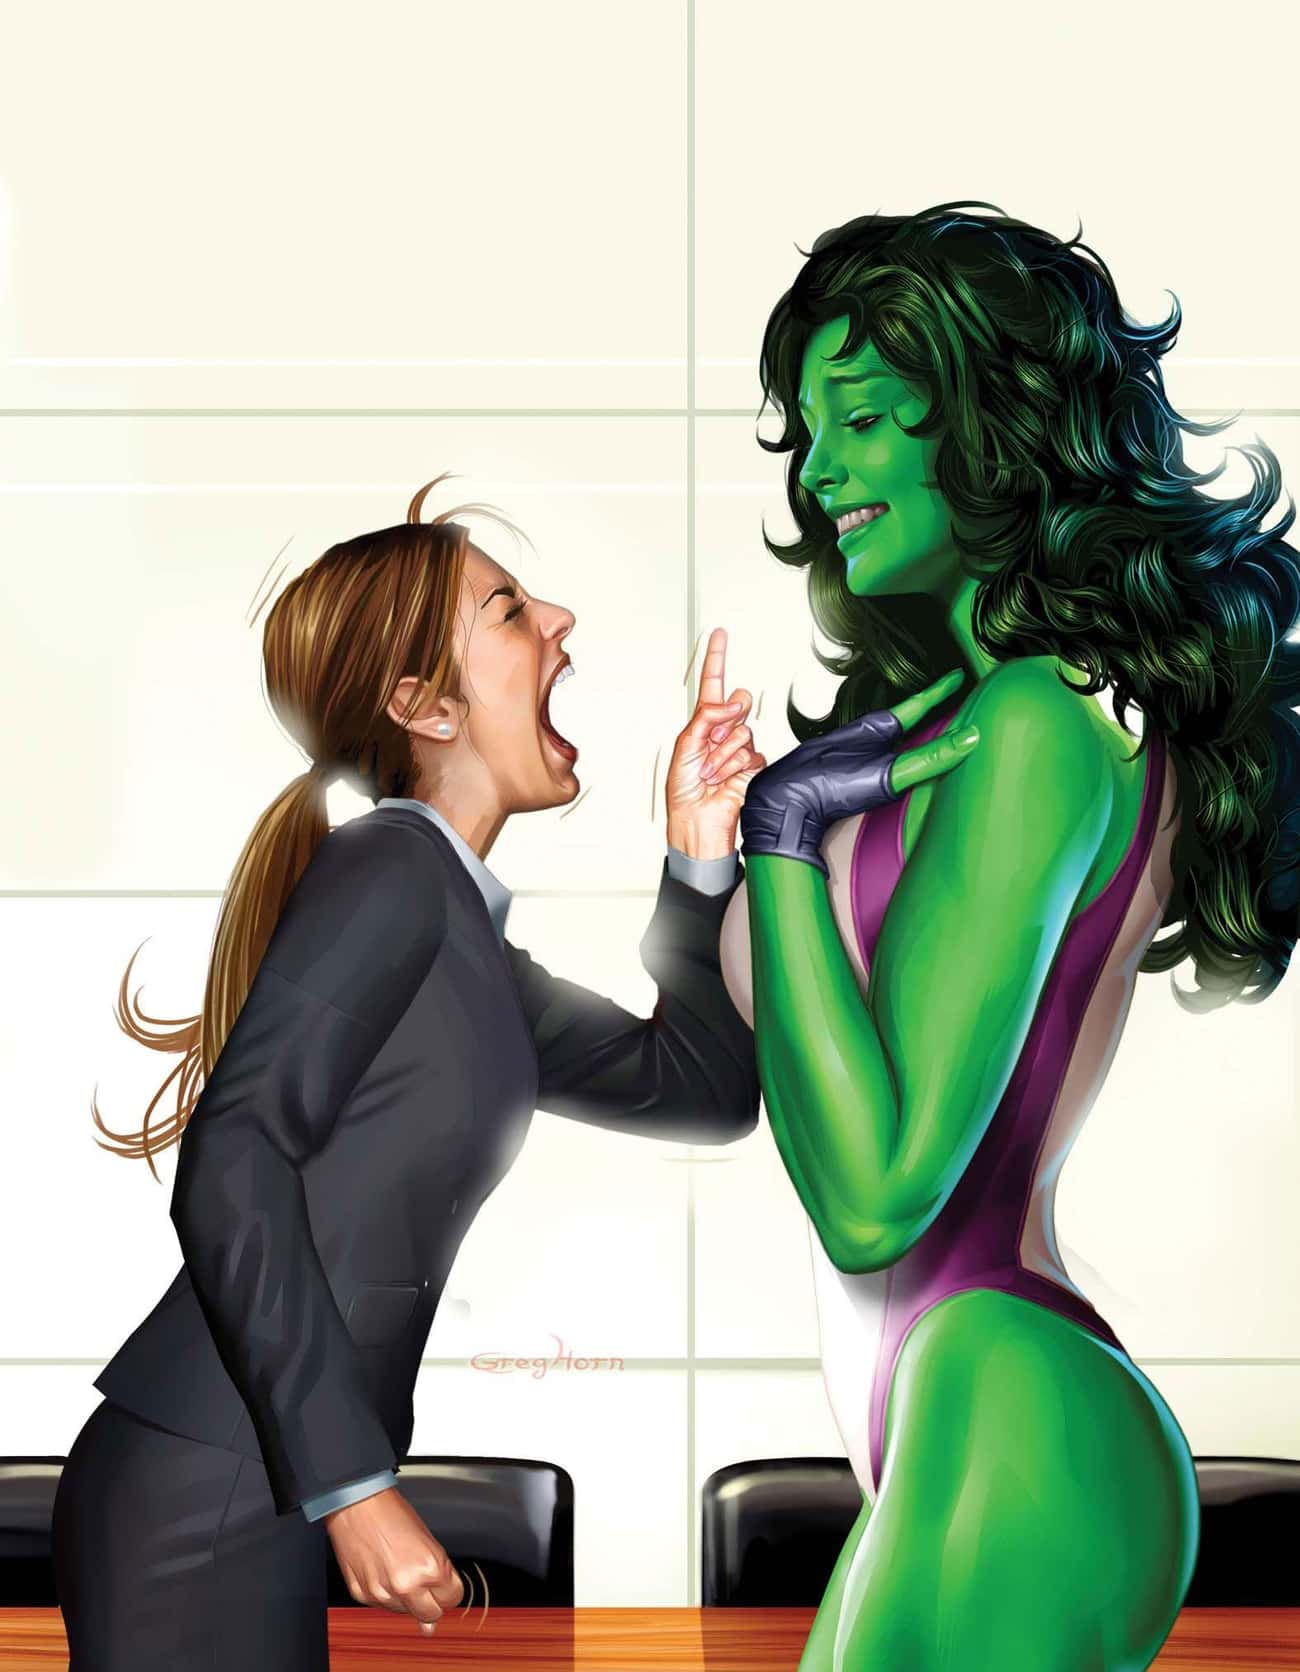 Almost Immediately, She-Hulk’s Intelligence And Self-Control Distinguish Her From The Hulk